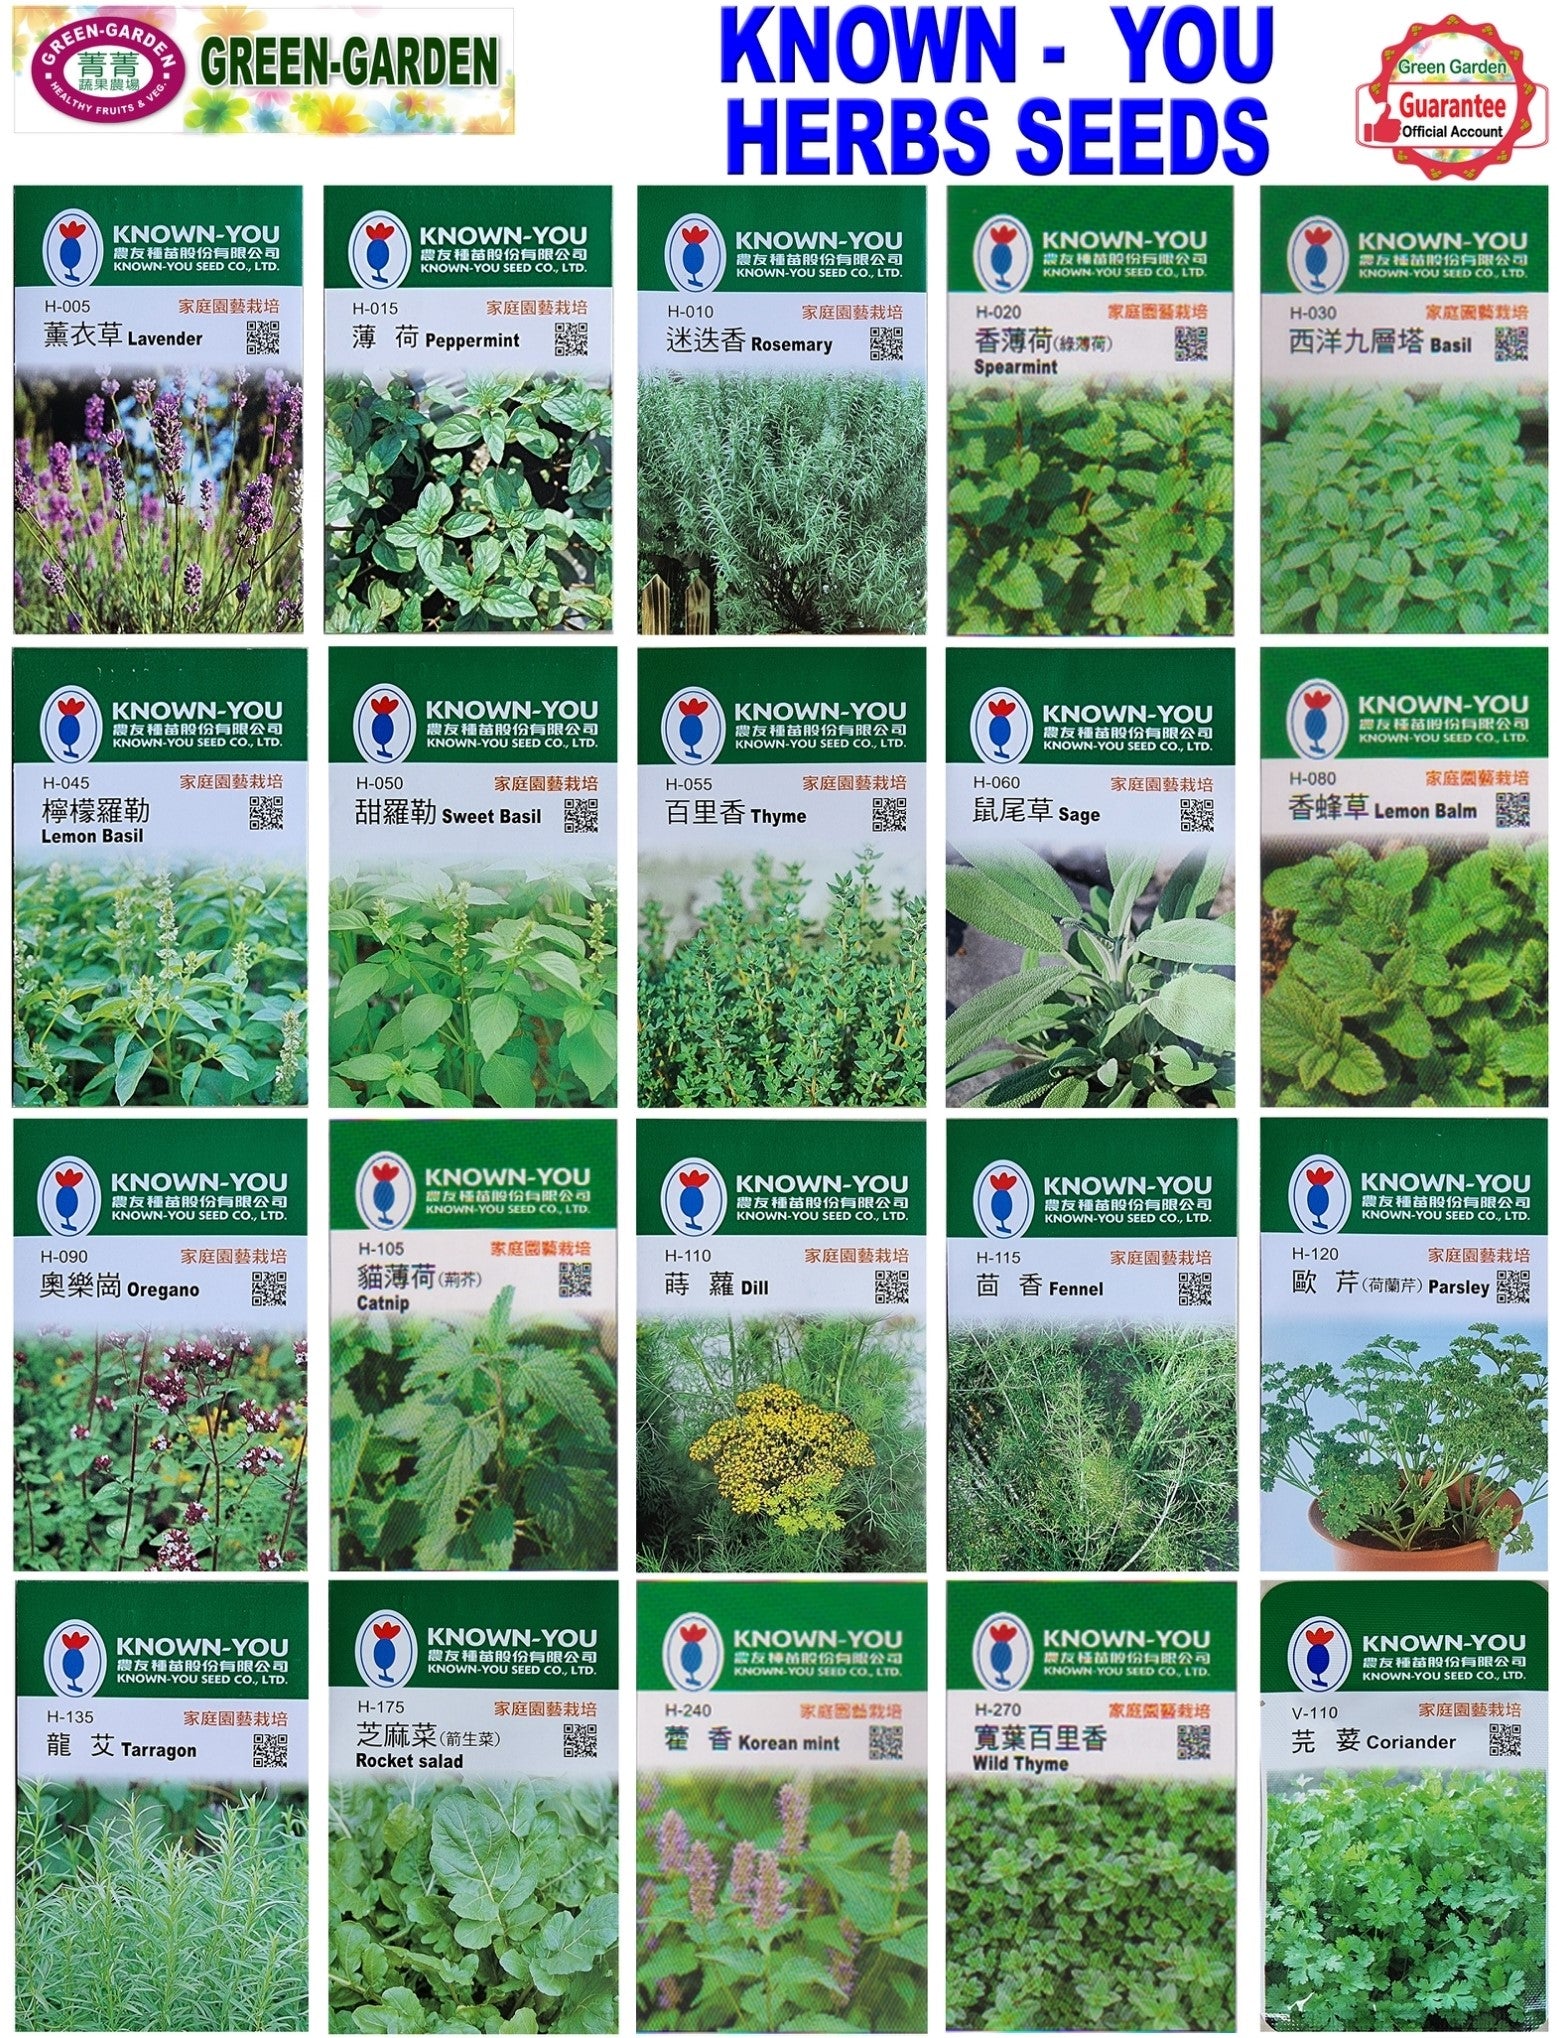 Known you Herbs Seeds (H-090 Oregano)